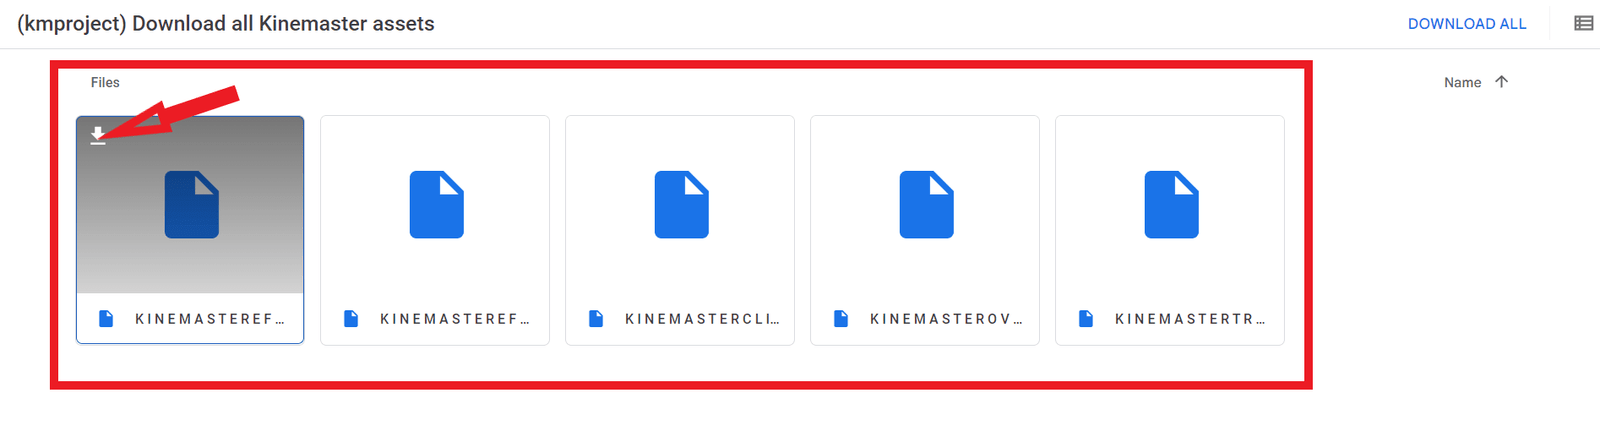 download all kinemaster assets in one click kmproject